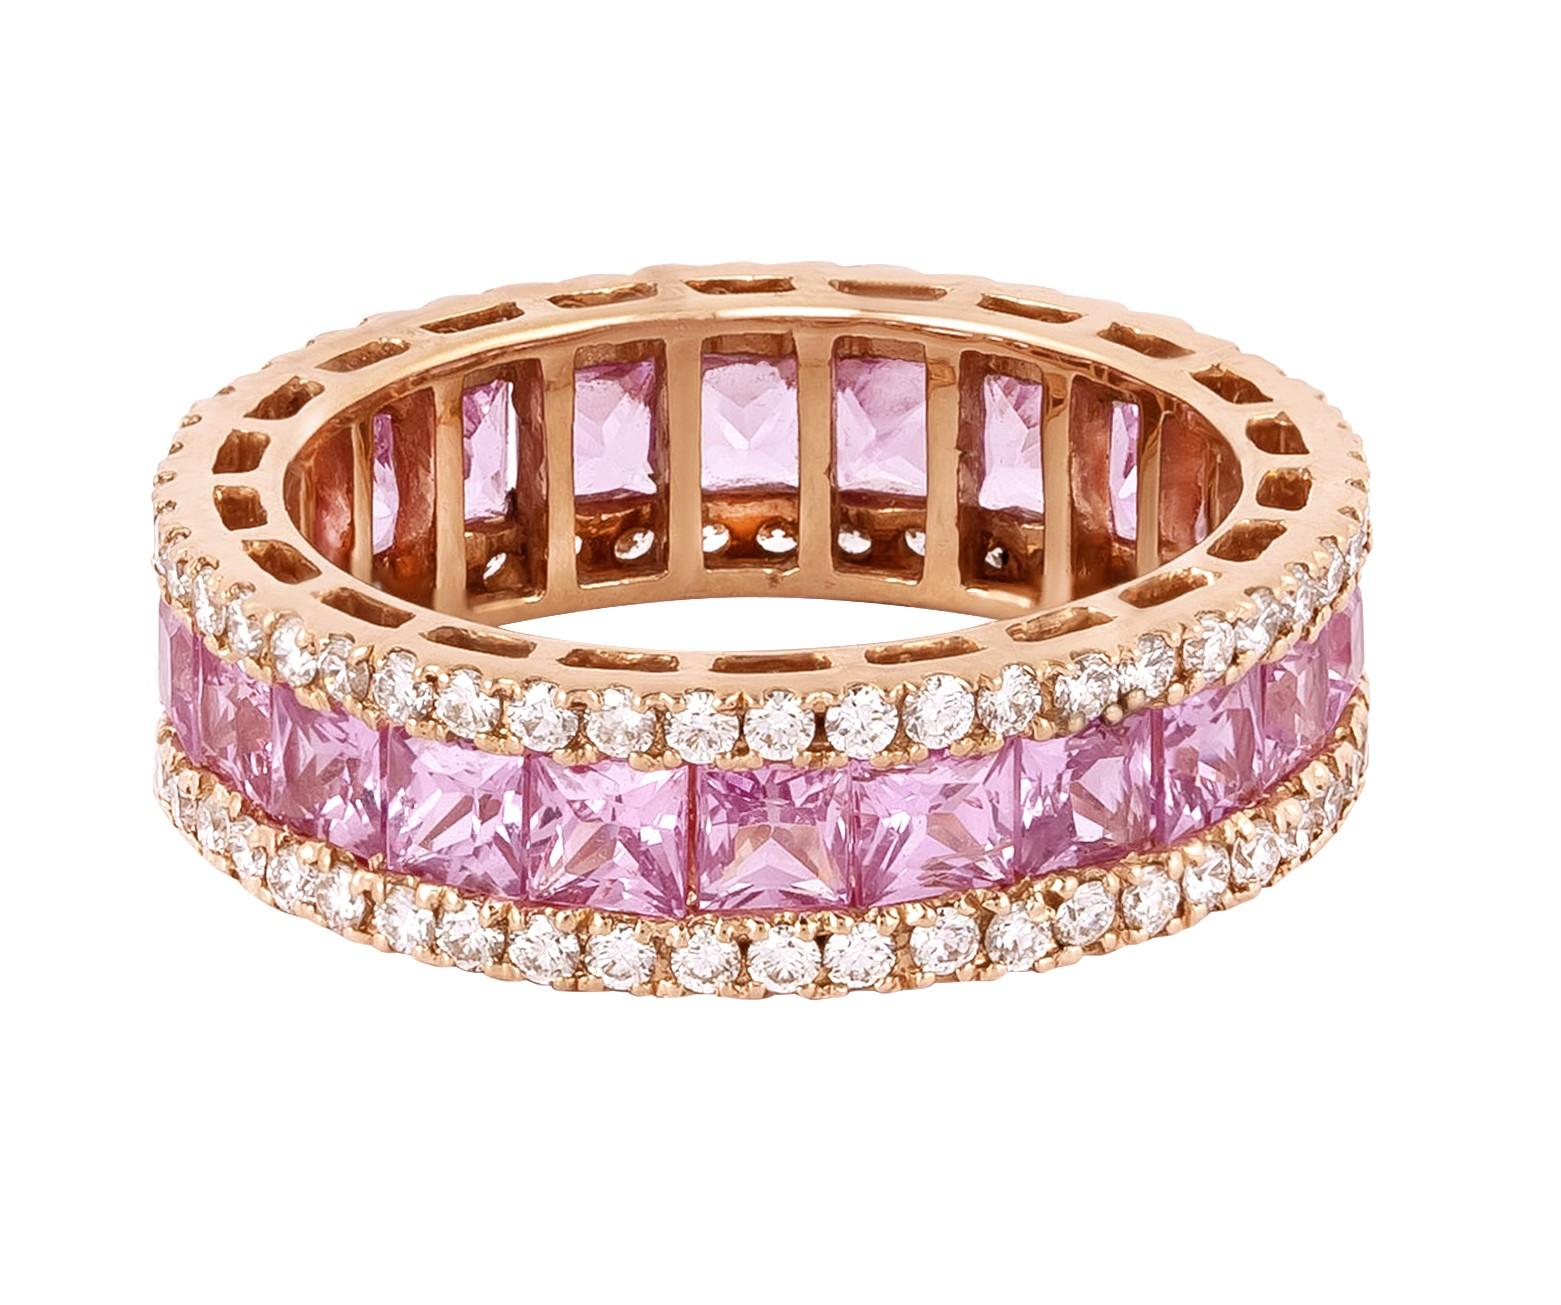 Contemporary 18 Karat Gold 4.05 Carat Diamond and Pink Sapphire Eternity Cocktail Ring  For Sale